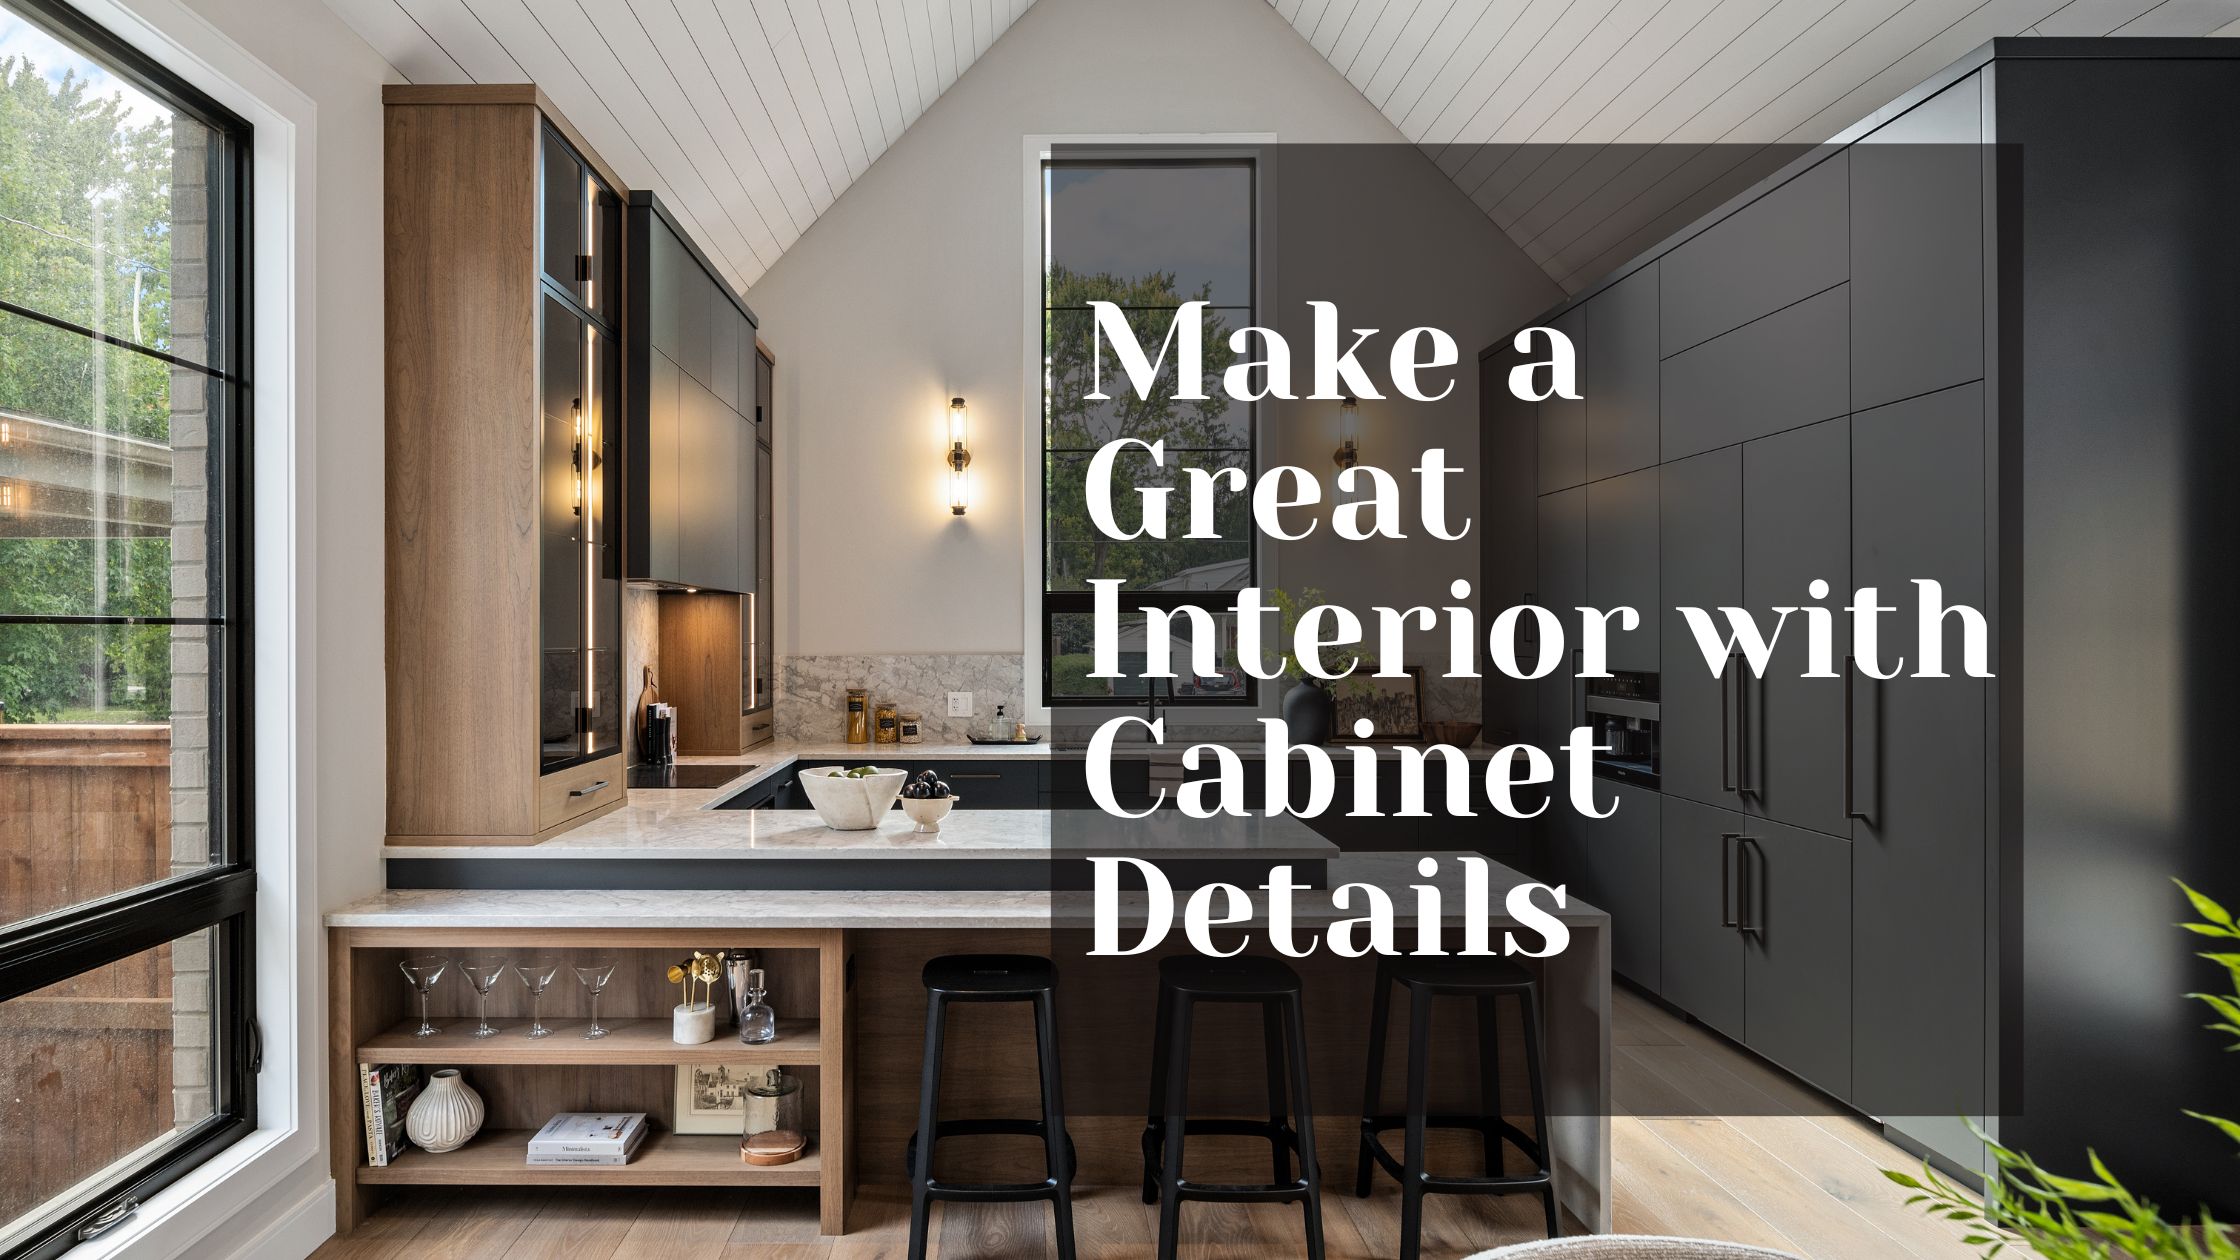 How to Make a Great Interior with Cabinet Details